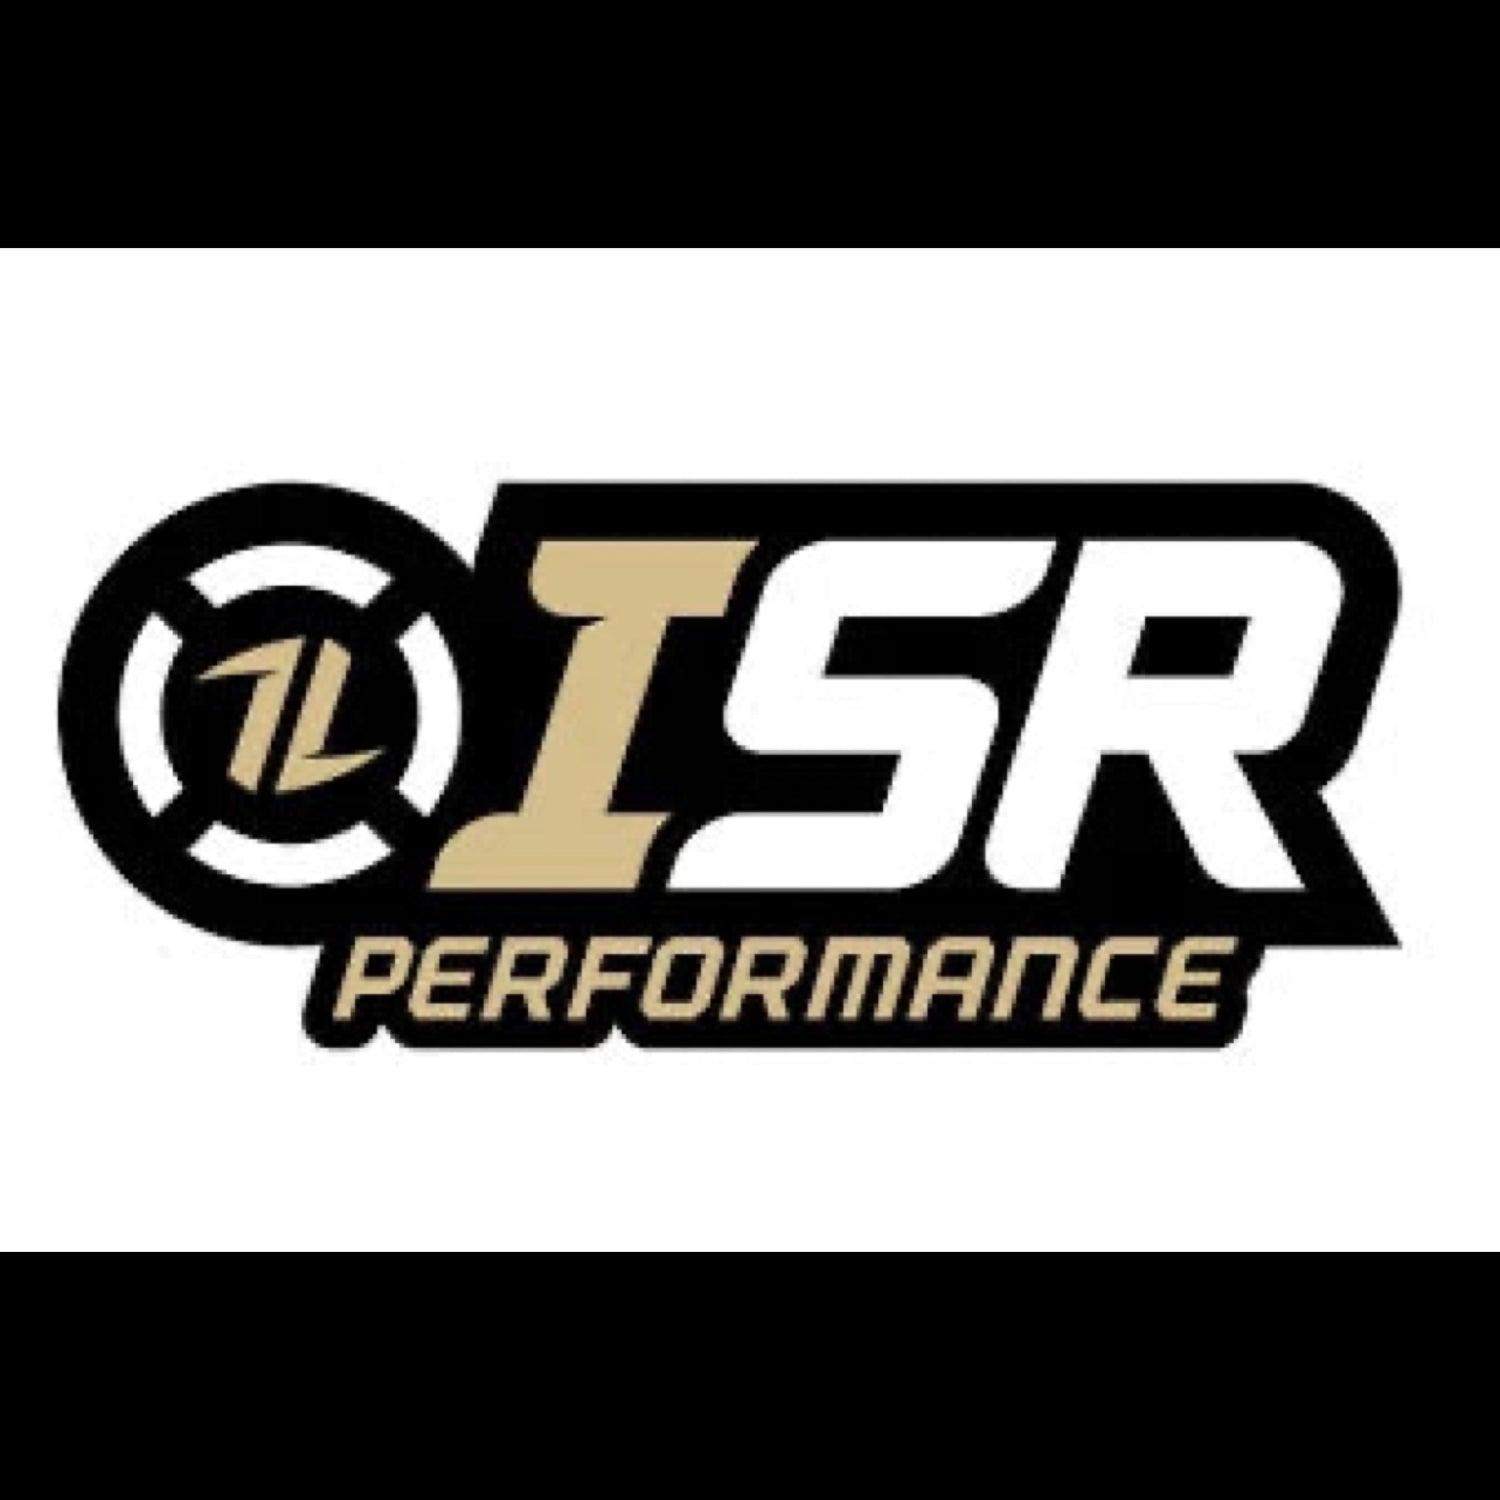 ISR Performance logo with white background